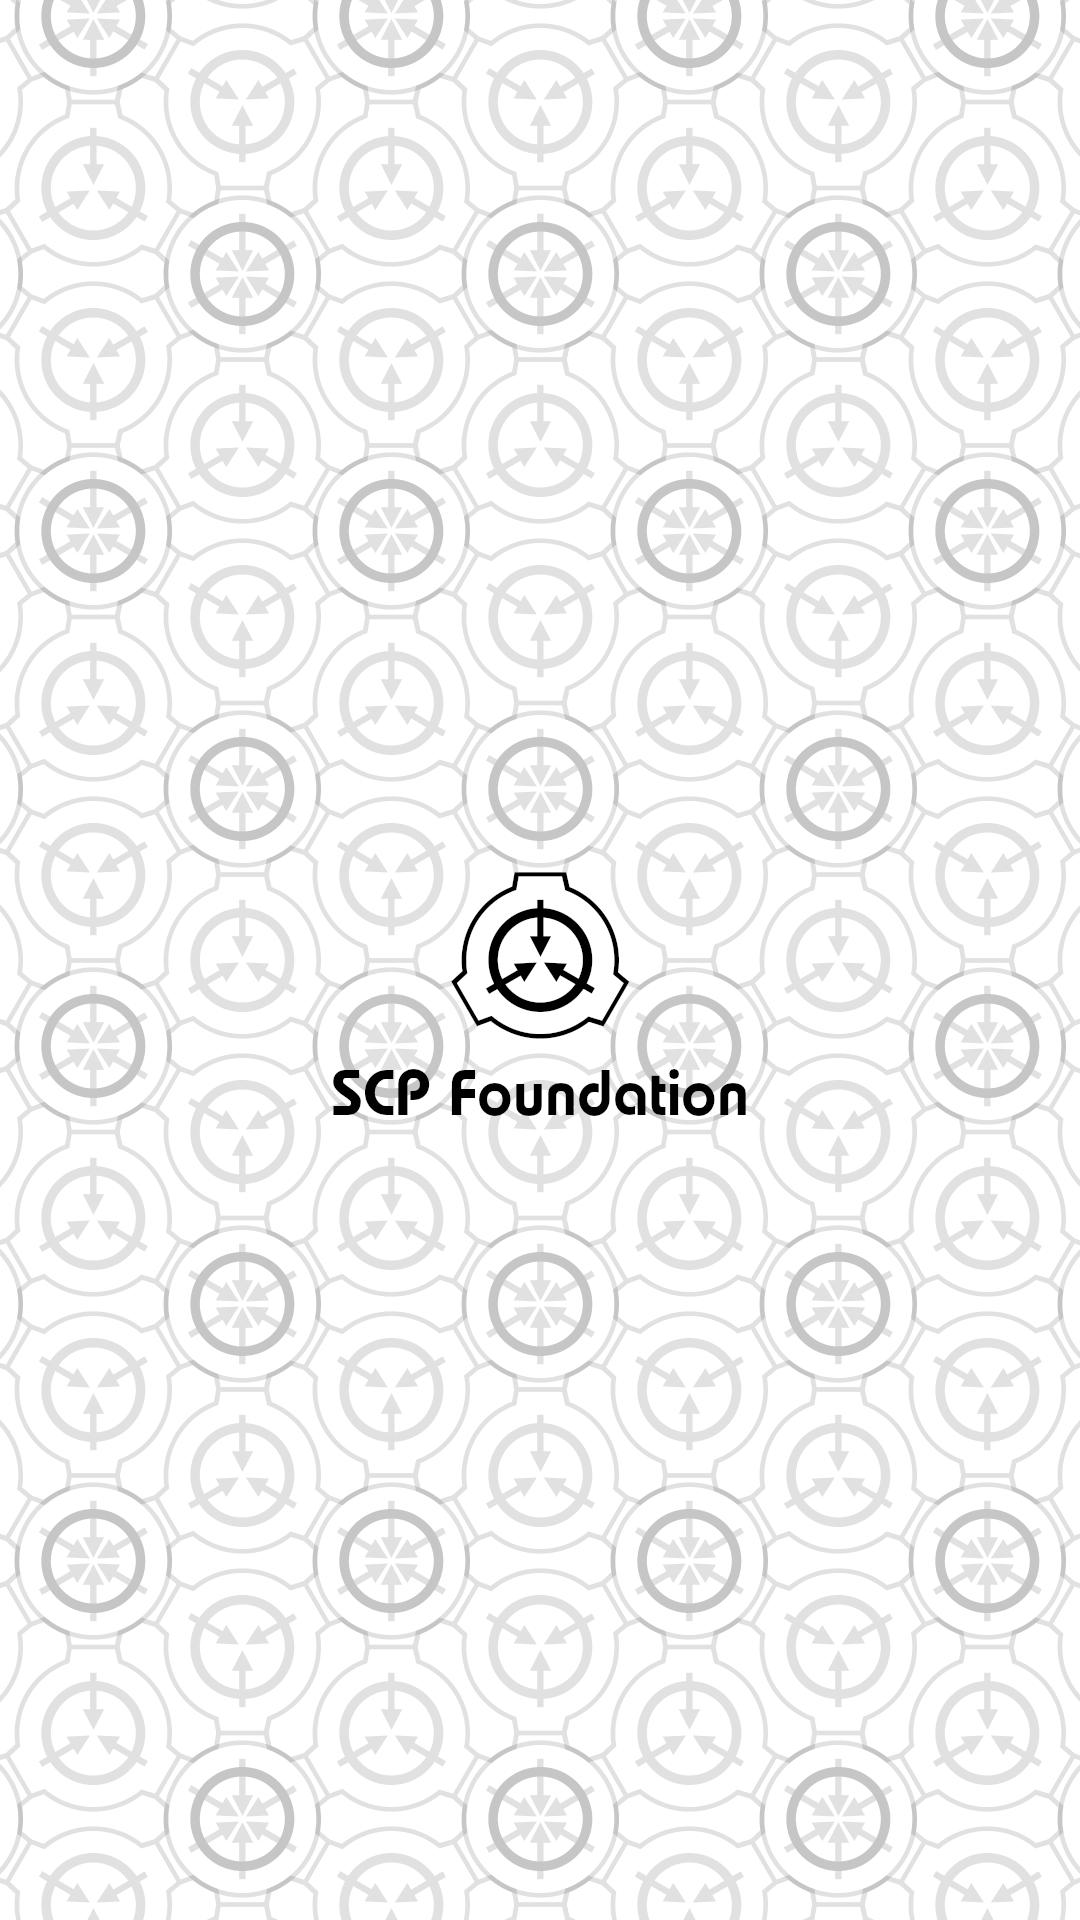 ᚲᚢᚾᚨᚾᚢᛁ ロゴを並べてずらしてからのscp壁紙 Scp Logo By Aelanna T Co G6qcl4syr6